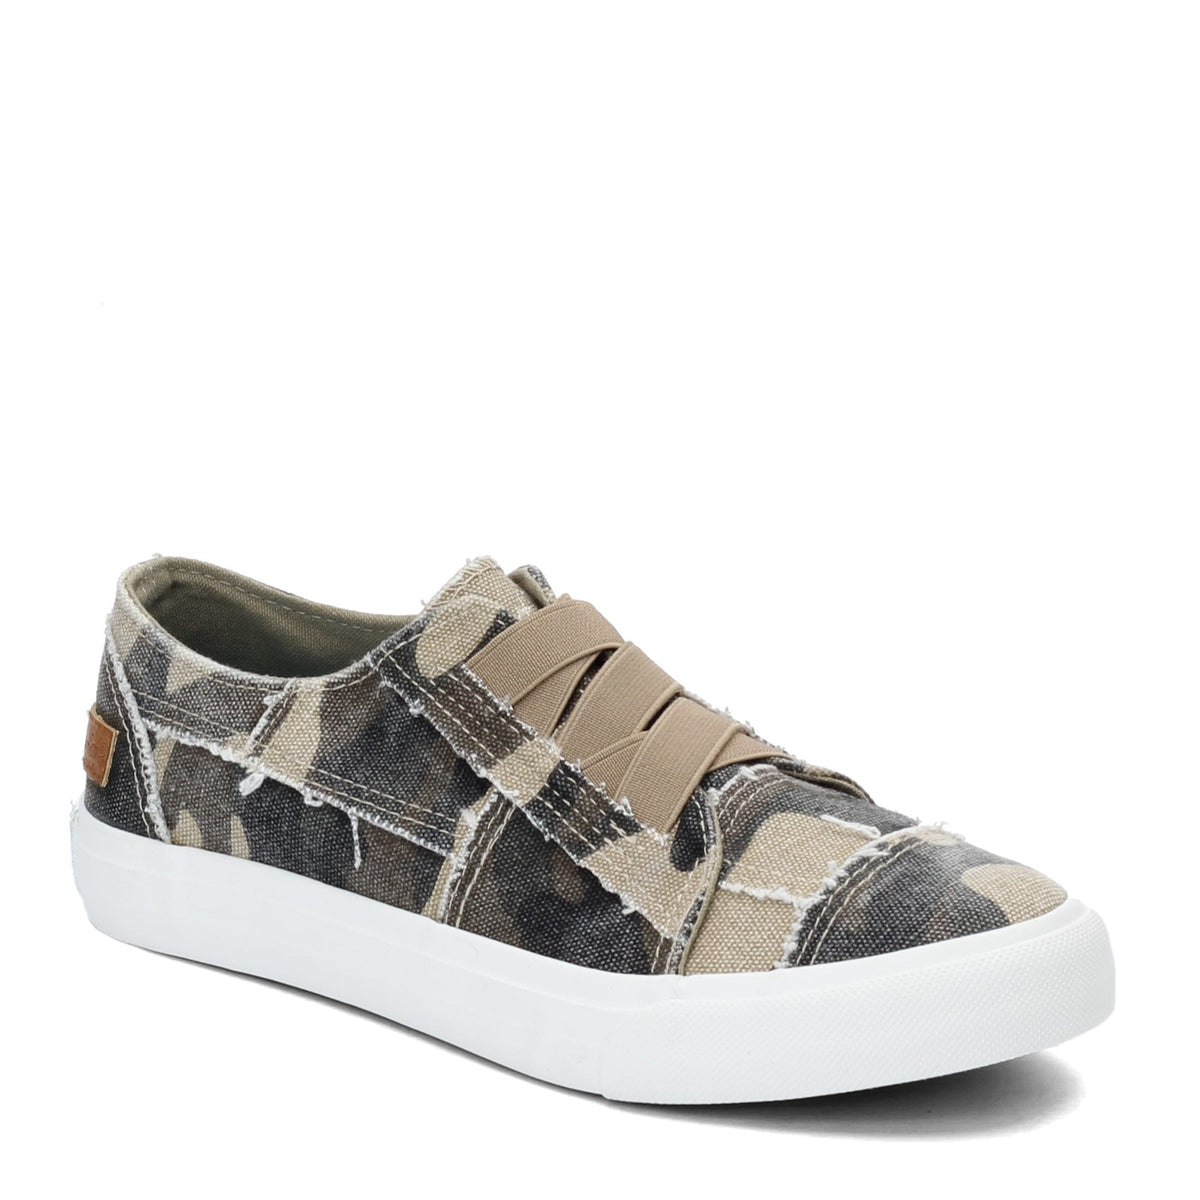 Natural Love Not War Canvas Marley Slip On Shoes